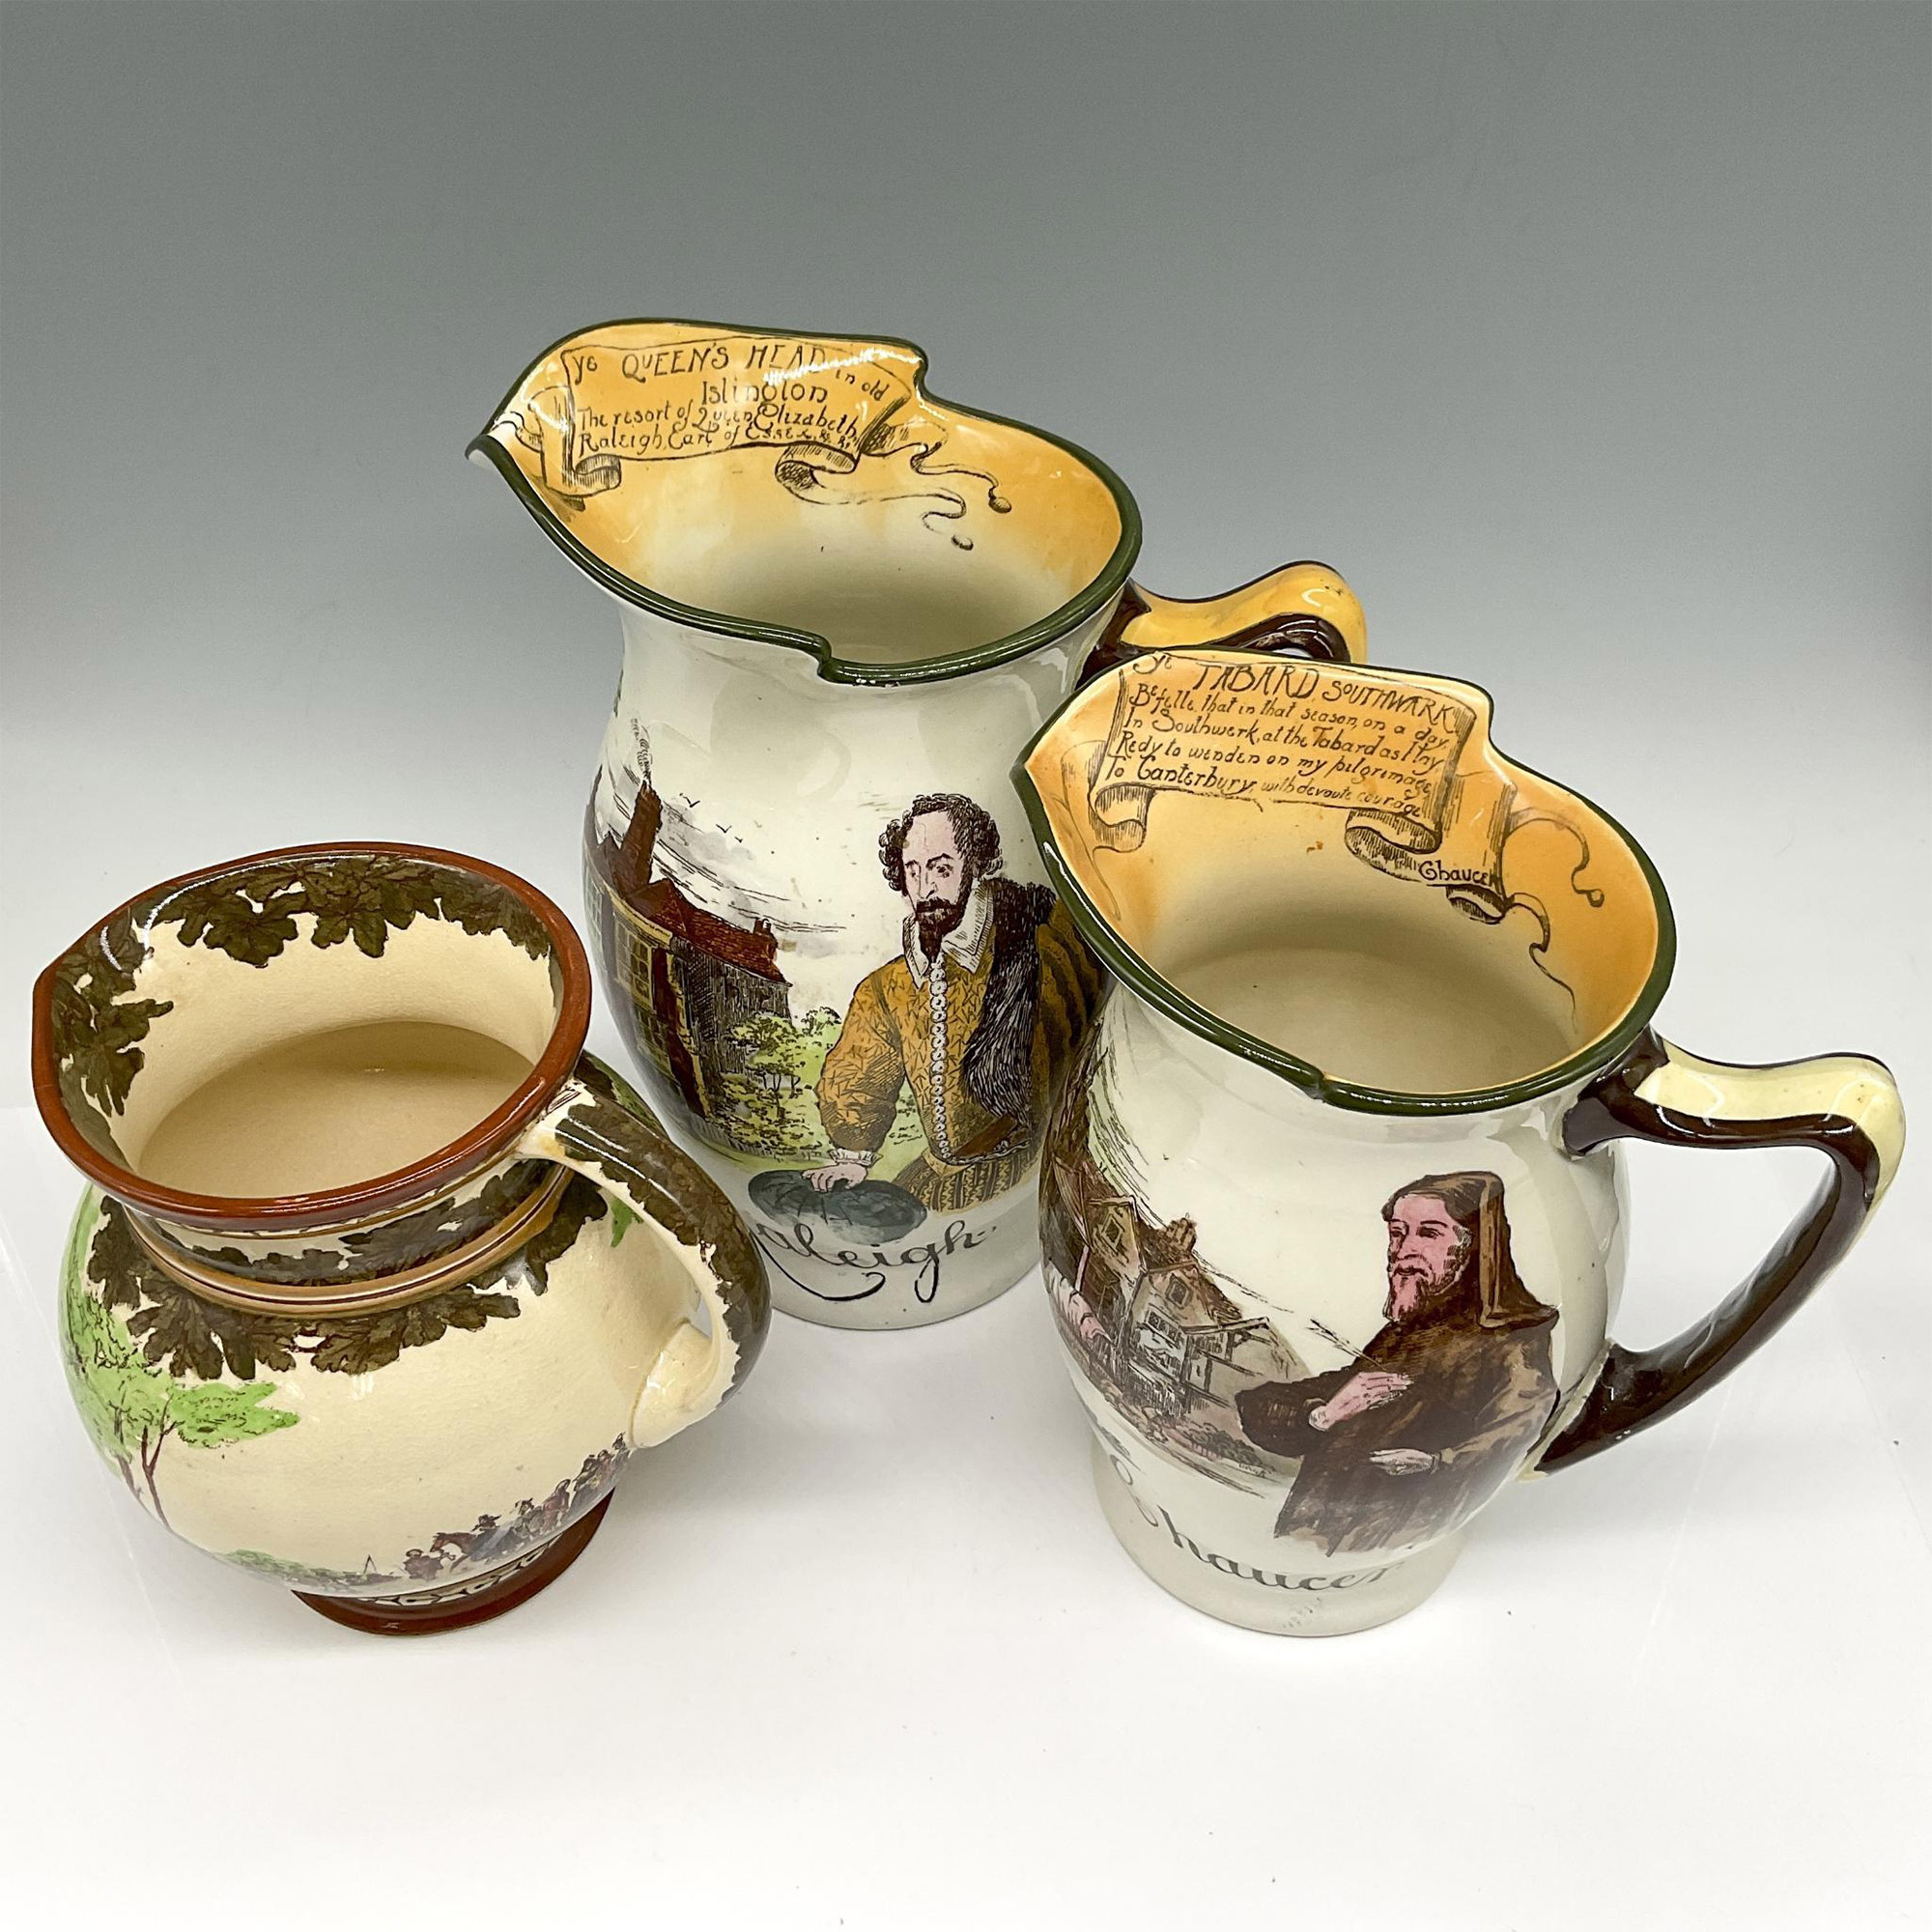 3pc Royal Doulton Porcelain Authors and Inns Series Pitchers - Image 2 of 4